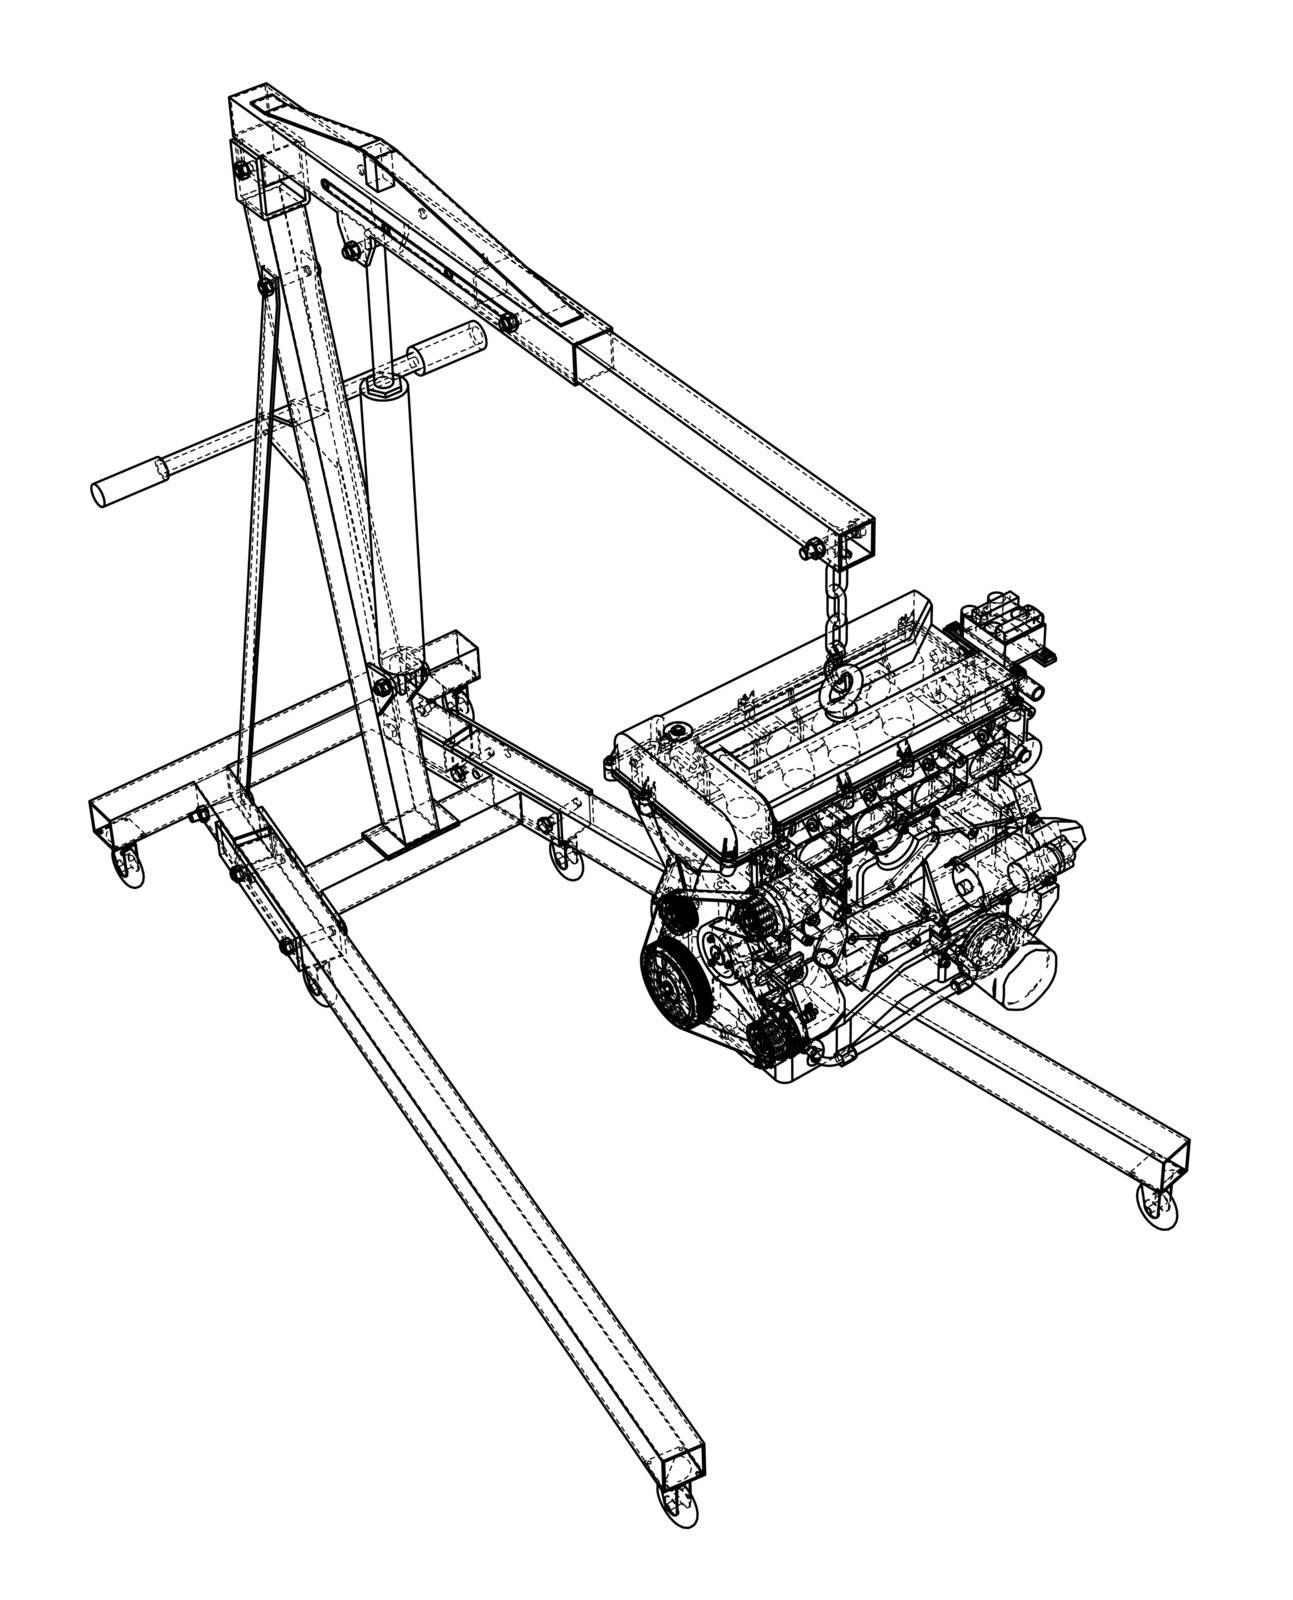 Engine hoist with engine outline. Vector rendering of 3d. Wire-frame style. The layers of visible and invisible lines are separated